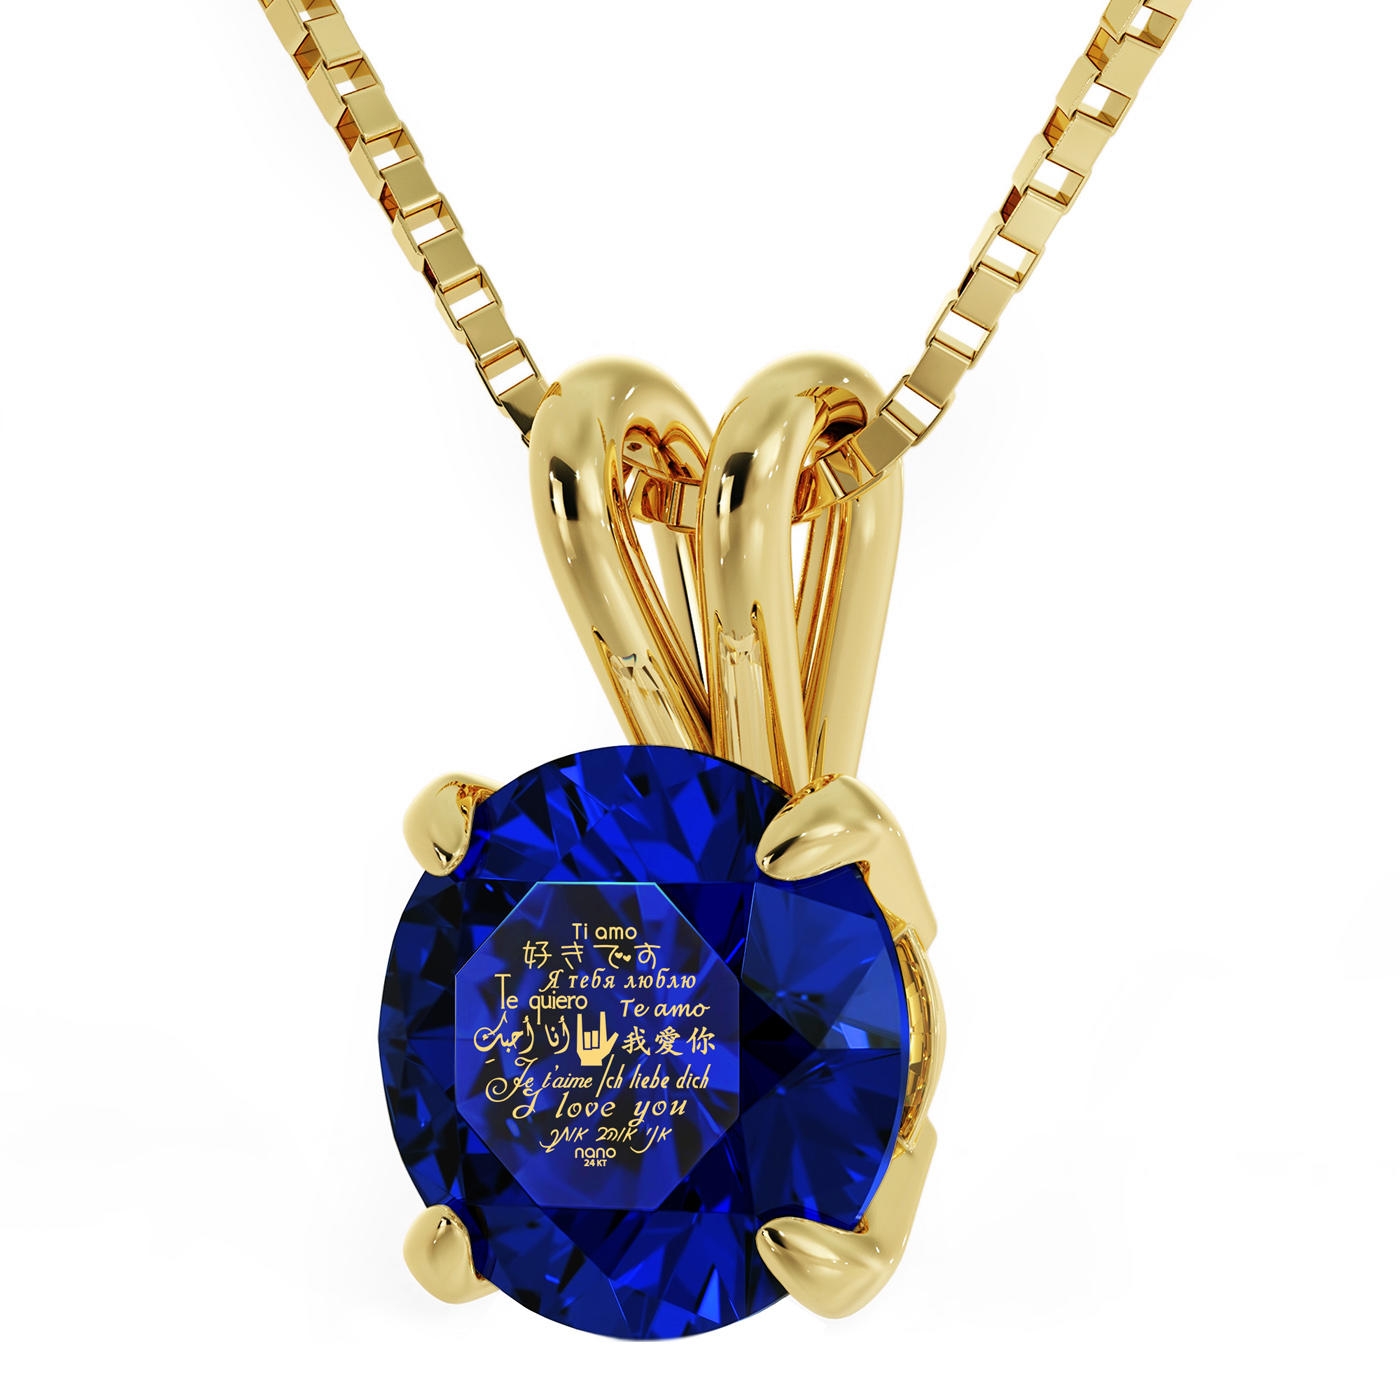 "I Love You" in 12 Languages: 24K Gold Plated and Swarovski Stone Necklace Micro-Inscribed with 24K Gold - 1